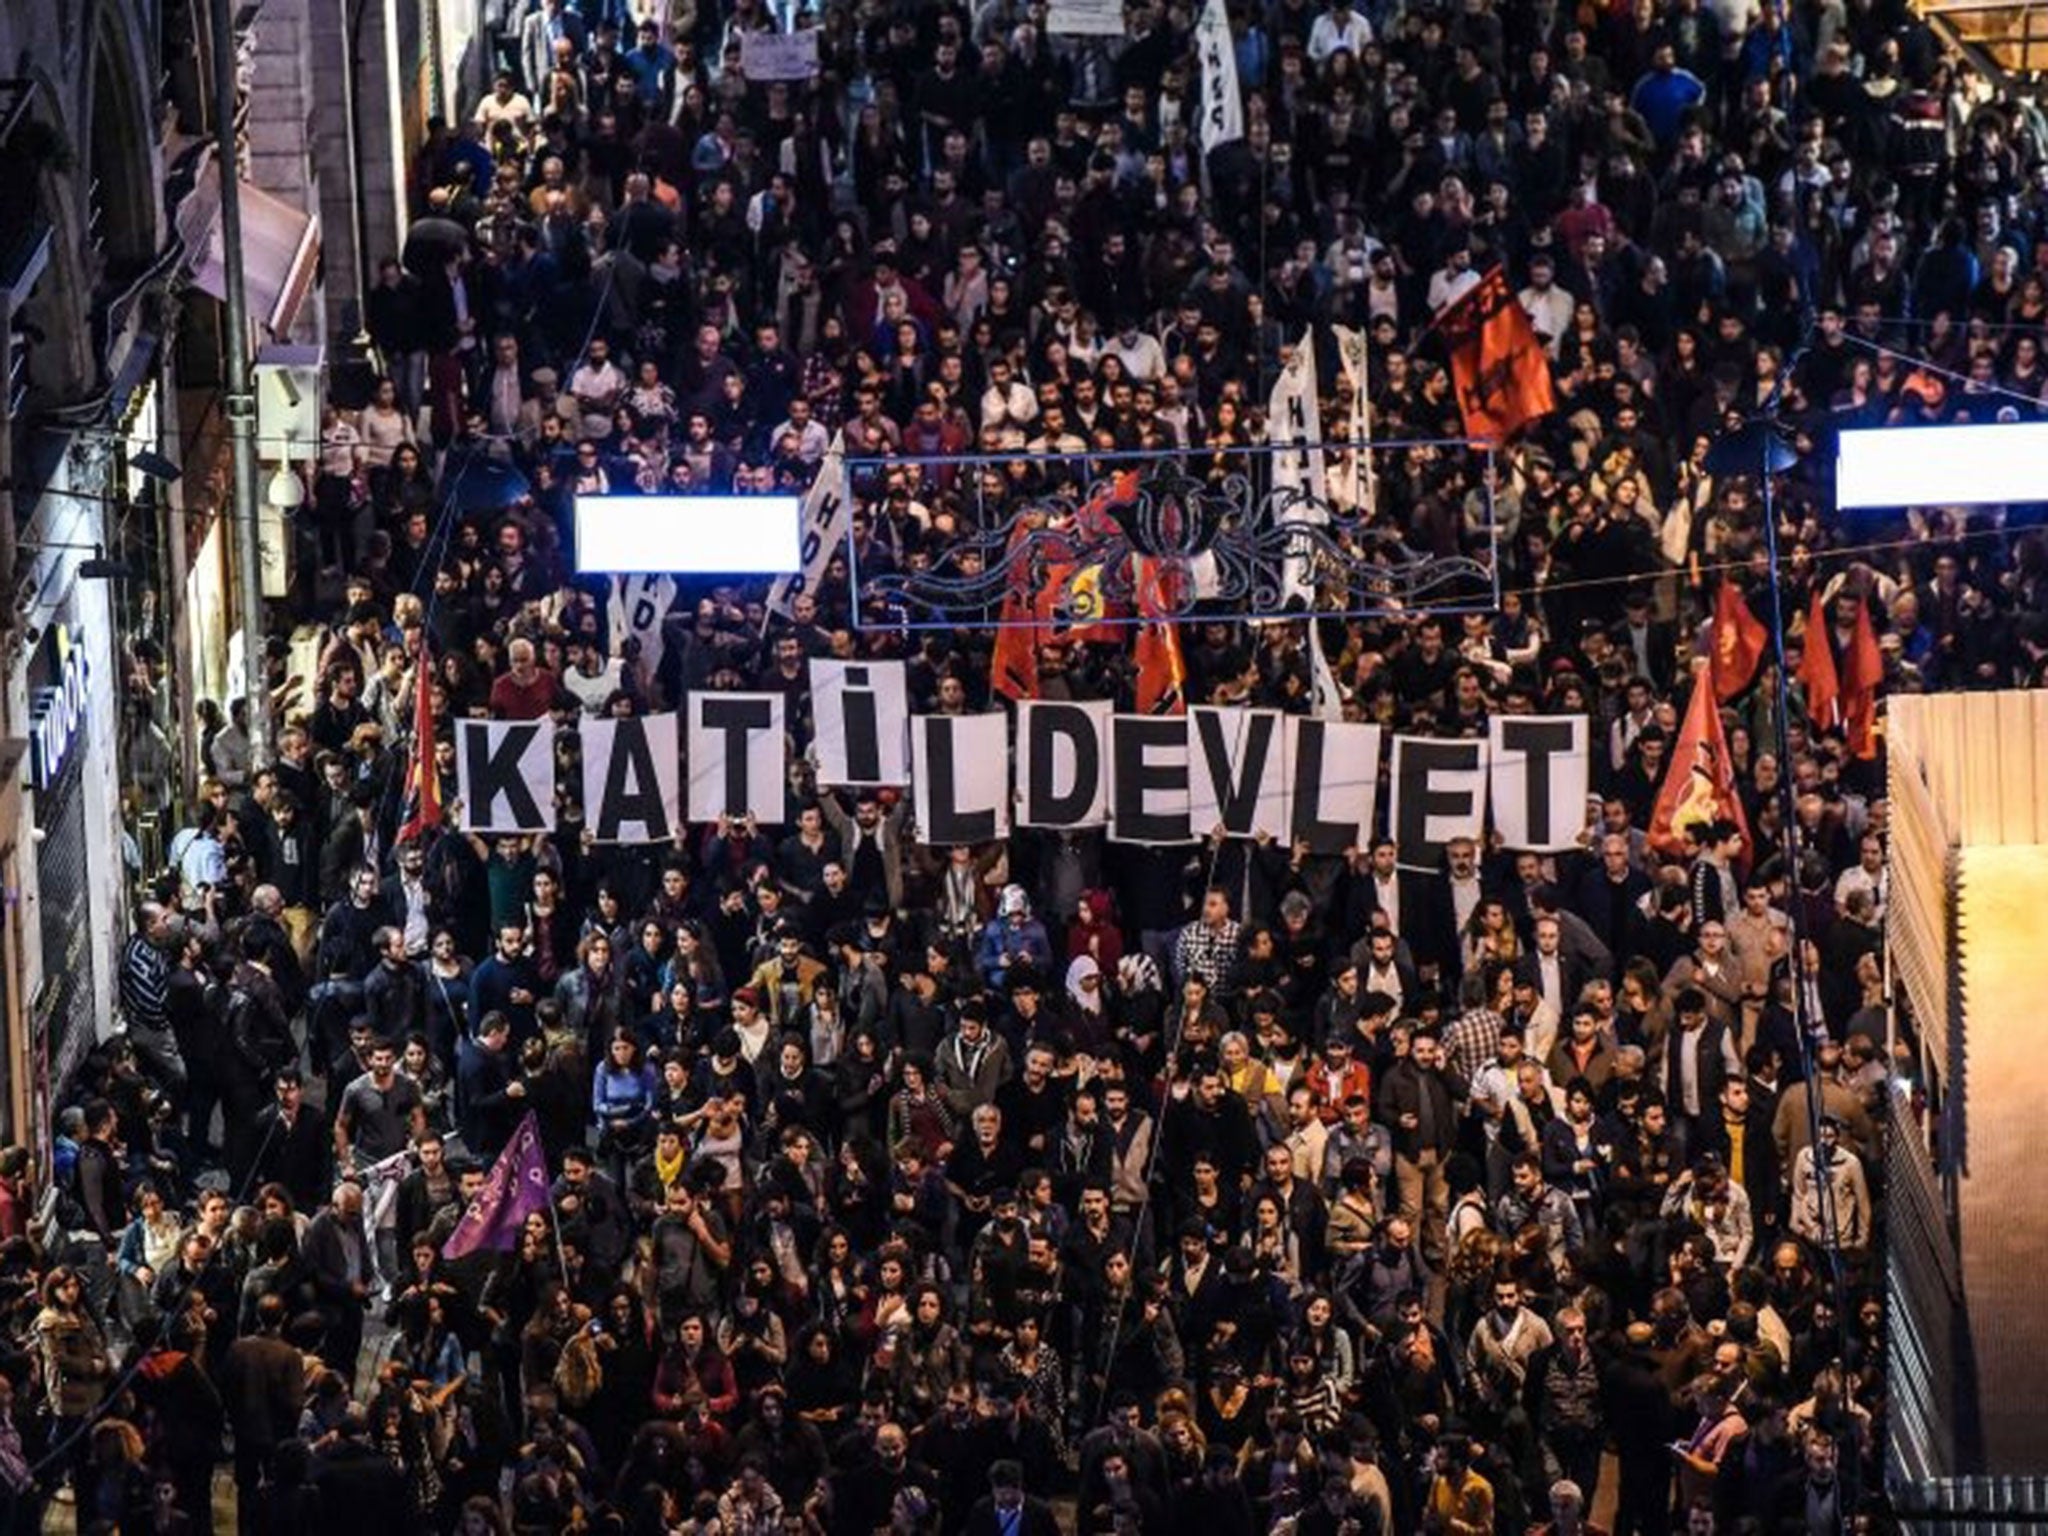 Placards reading "Killer state" are seen as thousands of protesters take part in a march against the deadly attack earlier in Ankara on October 10, 2015 at the Istiklal avenue in Istanbul.